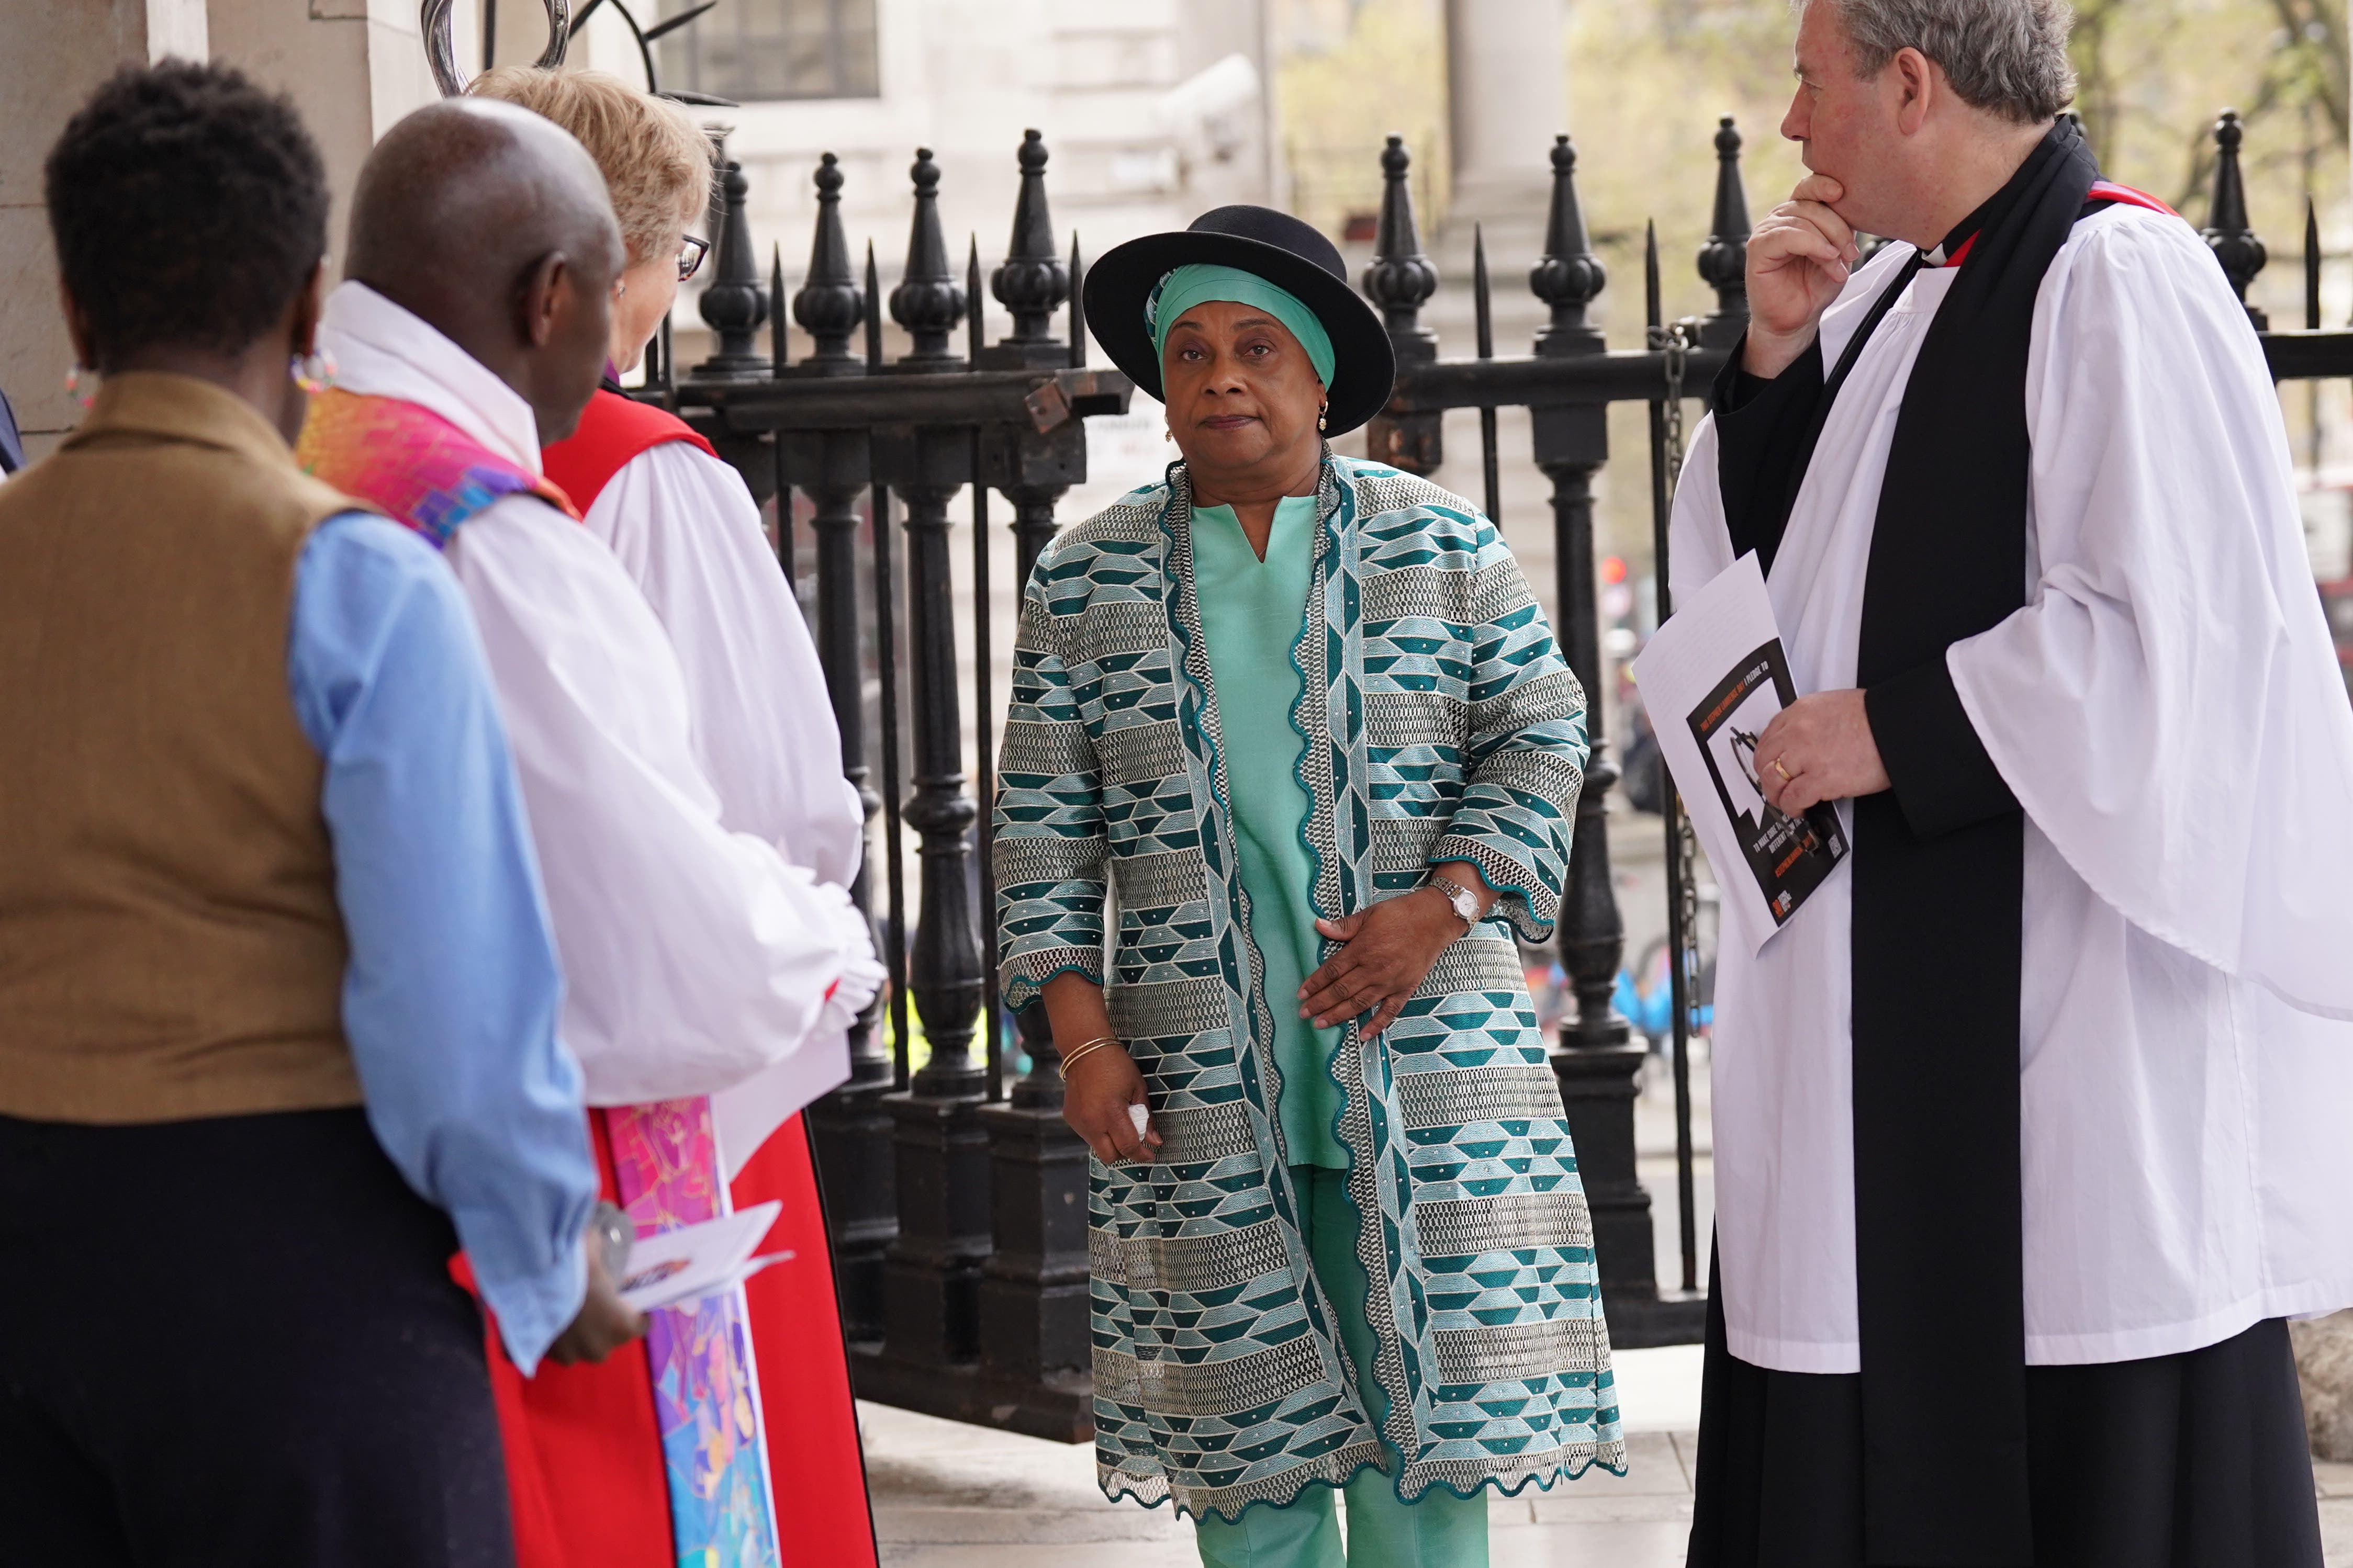 Baroness Doreen Lawrence attends a memorial service at St Martin-in-the-Fields in Trafalgar Square, London to commemorate the 30th anniversary of the murder of her son Stephen